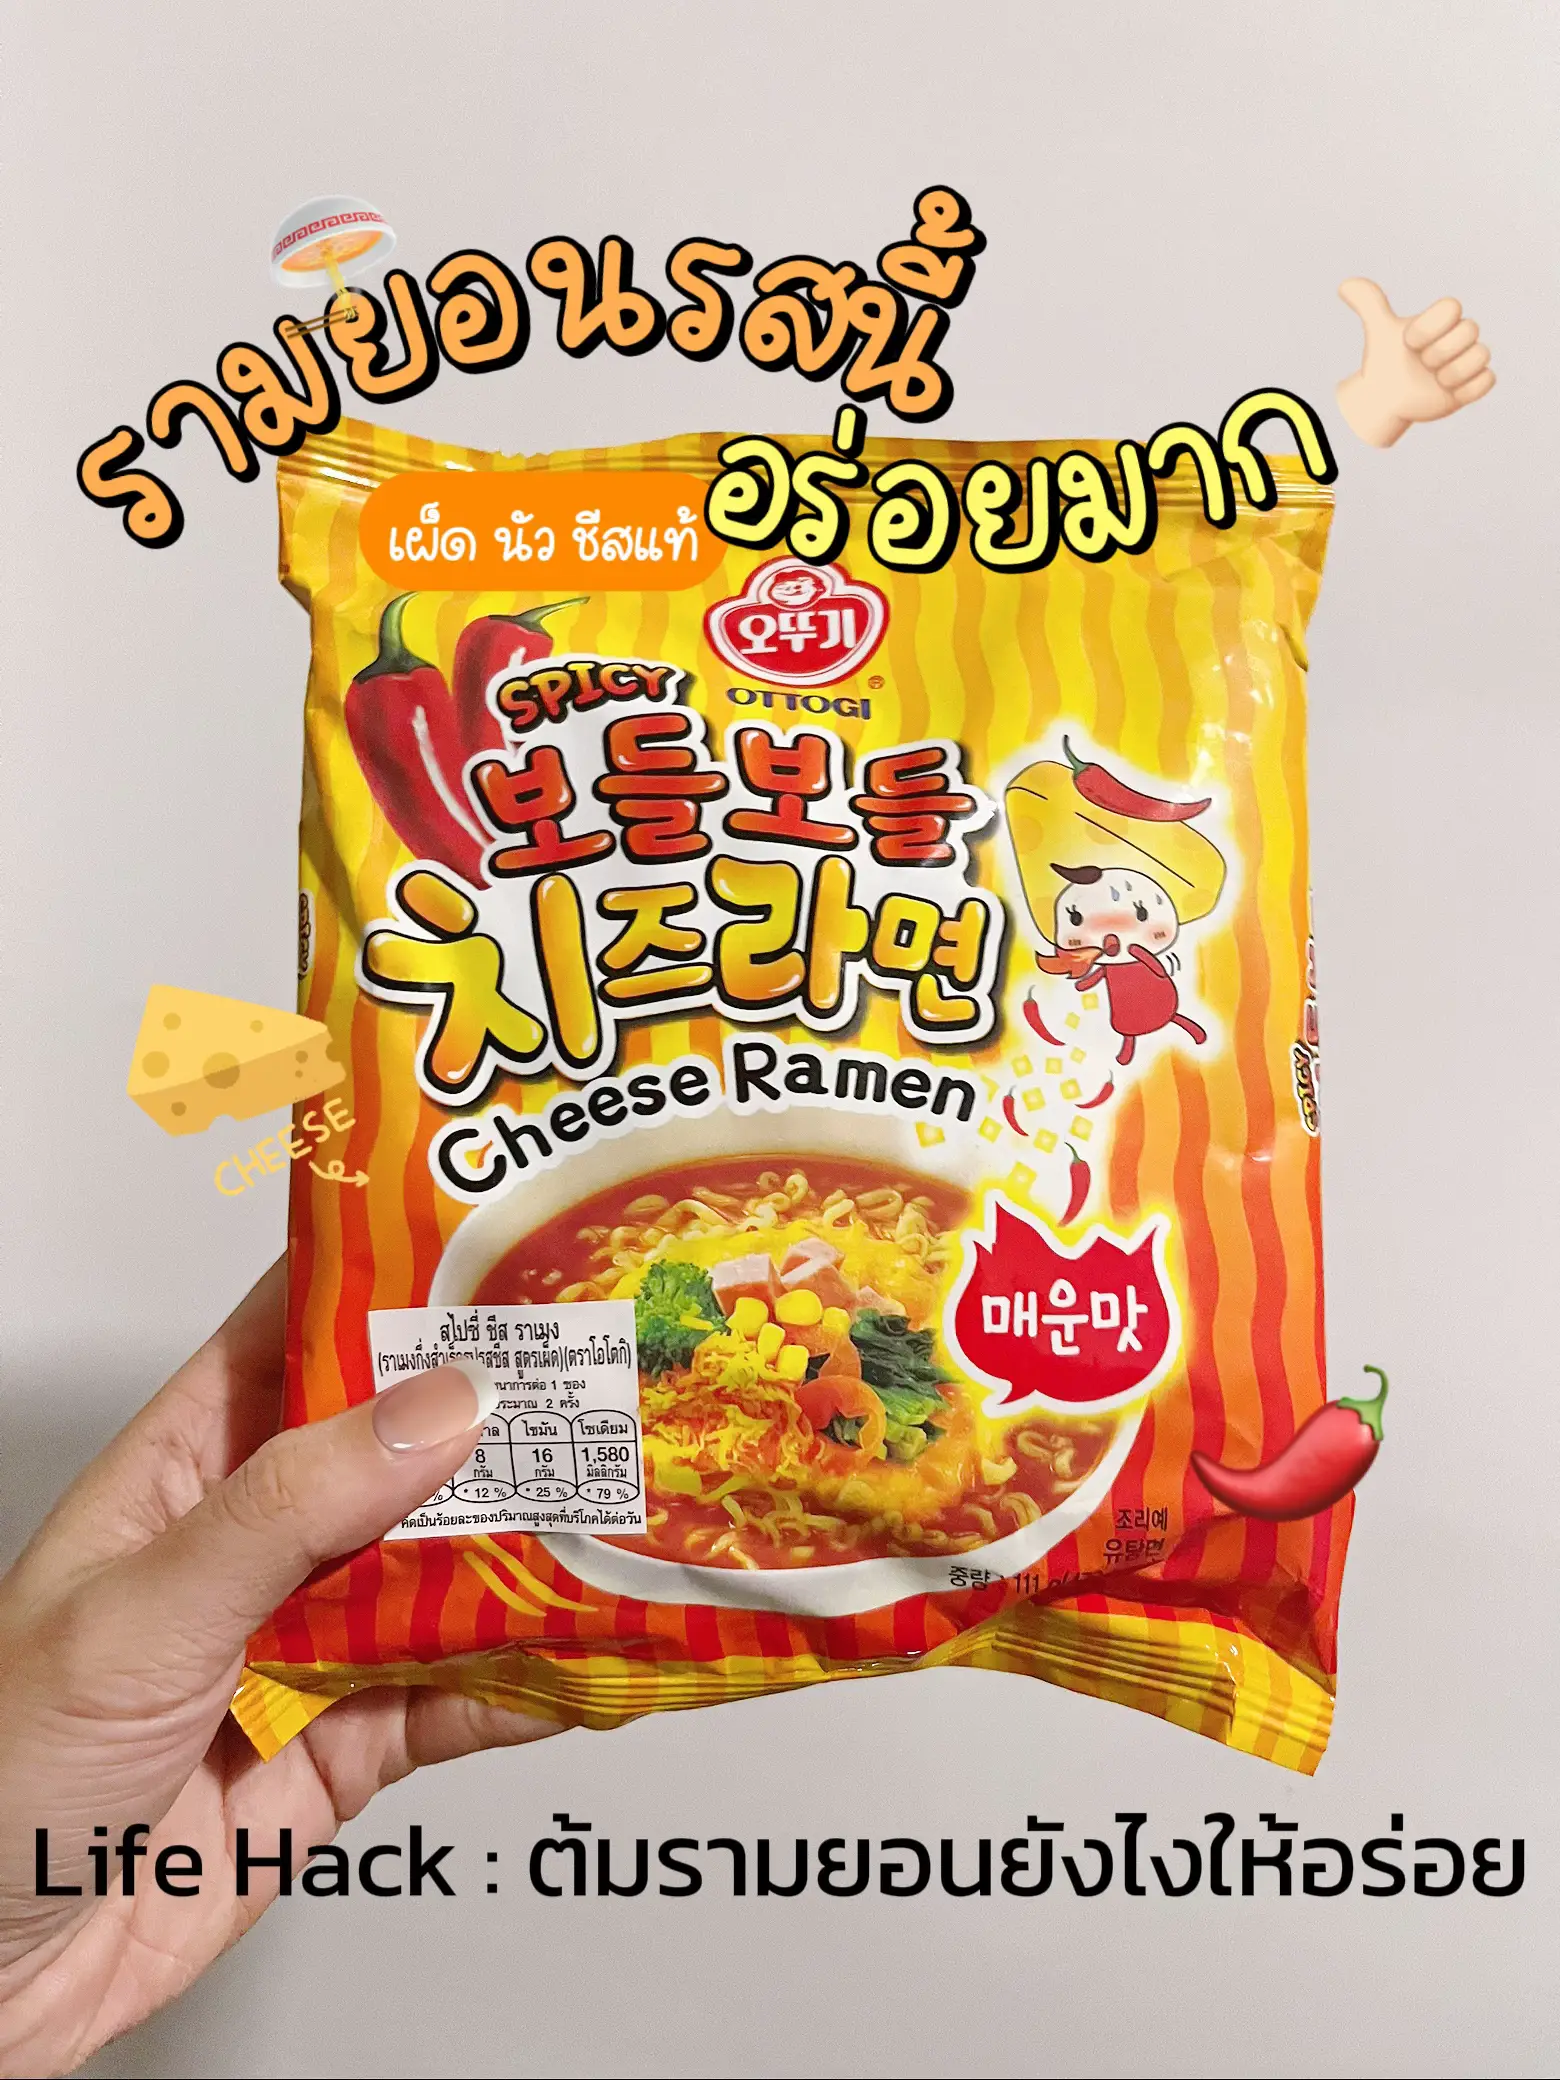 OTTOGI] Cheese Ramen Spicy Flavor, KOREAN STYLE INSTANT NOODLE 111g 8 pack